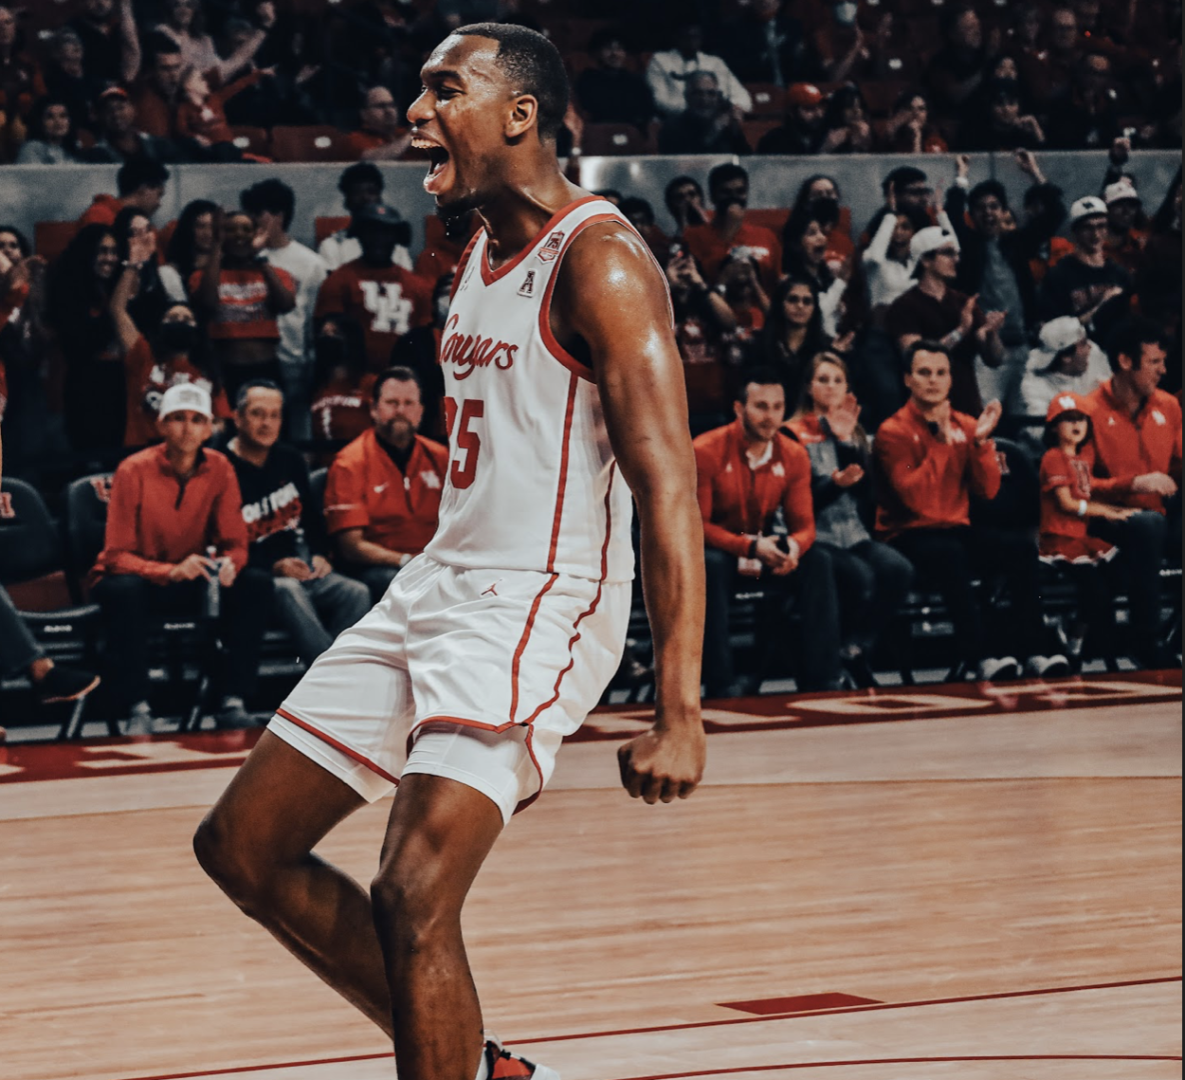 With the Cougars win over UCF on Thursday, forward Fabian White Jr. became the all-time wins leader in UH men's basketball program history with 110 career victories. | Victor Carroll/The Cougar